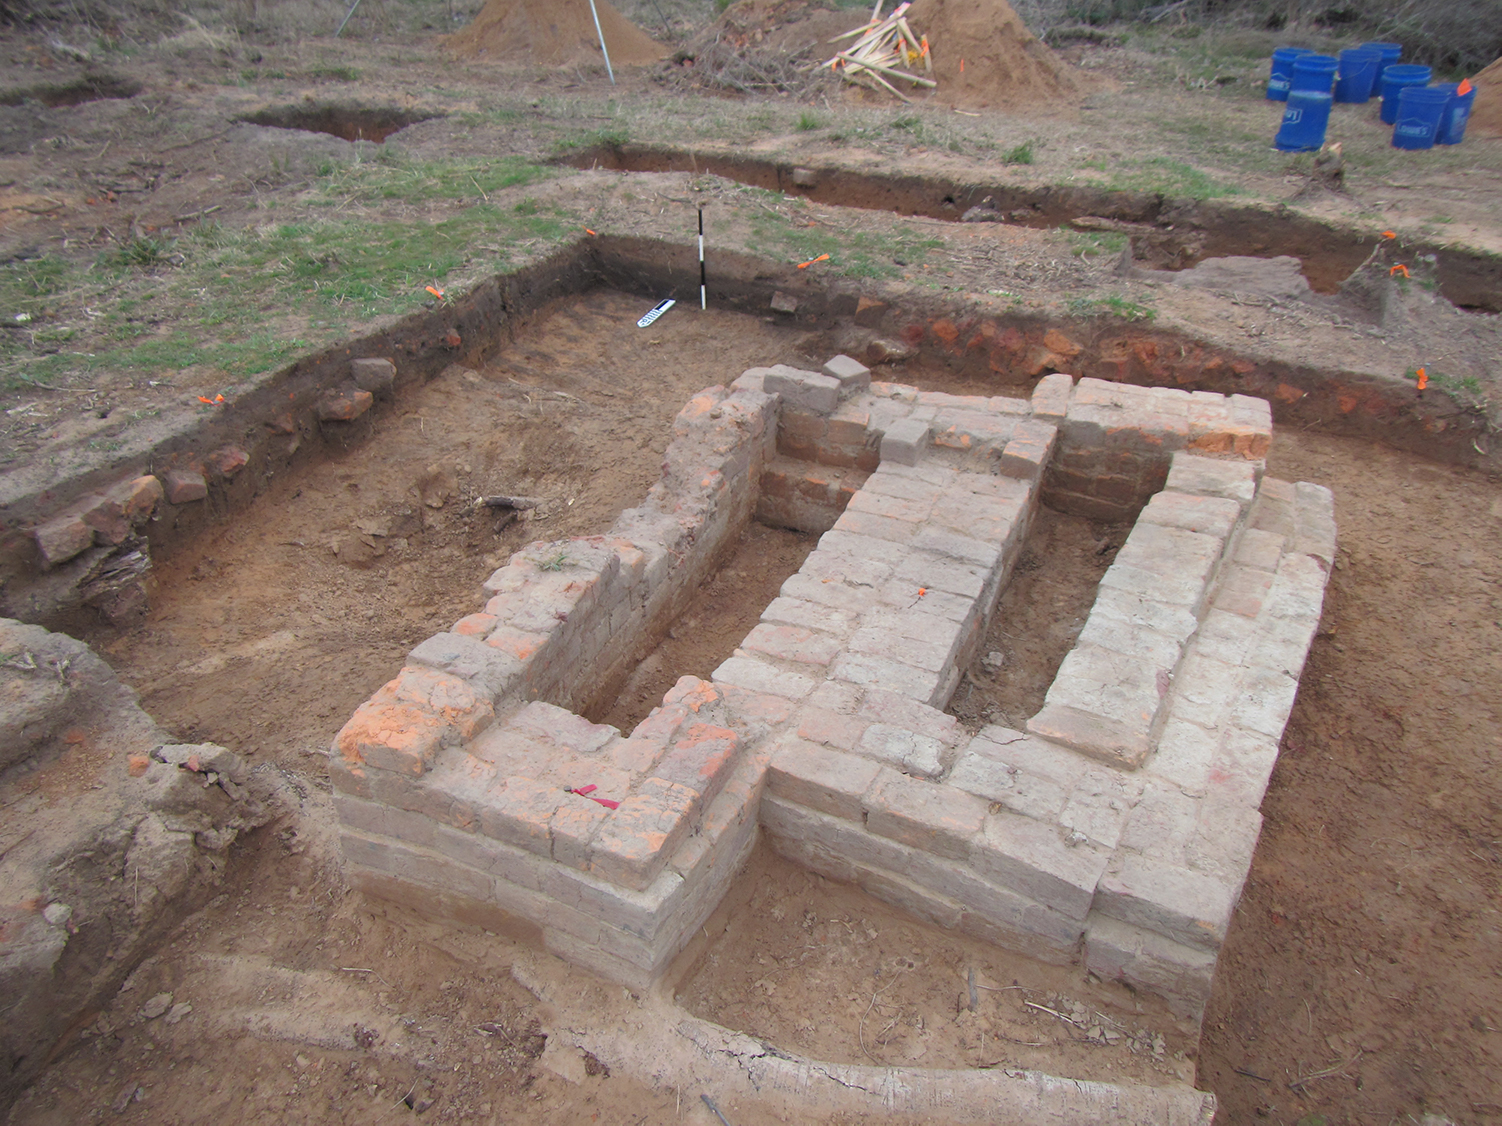 photo of excavation area mostly covered by patterns of bricks representing a chimney base